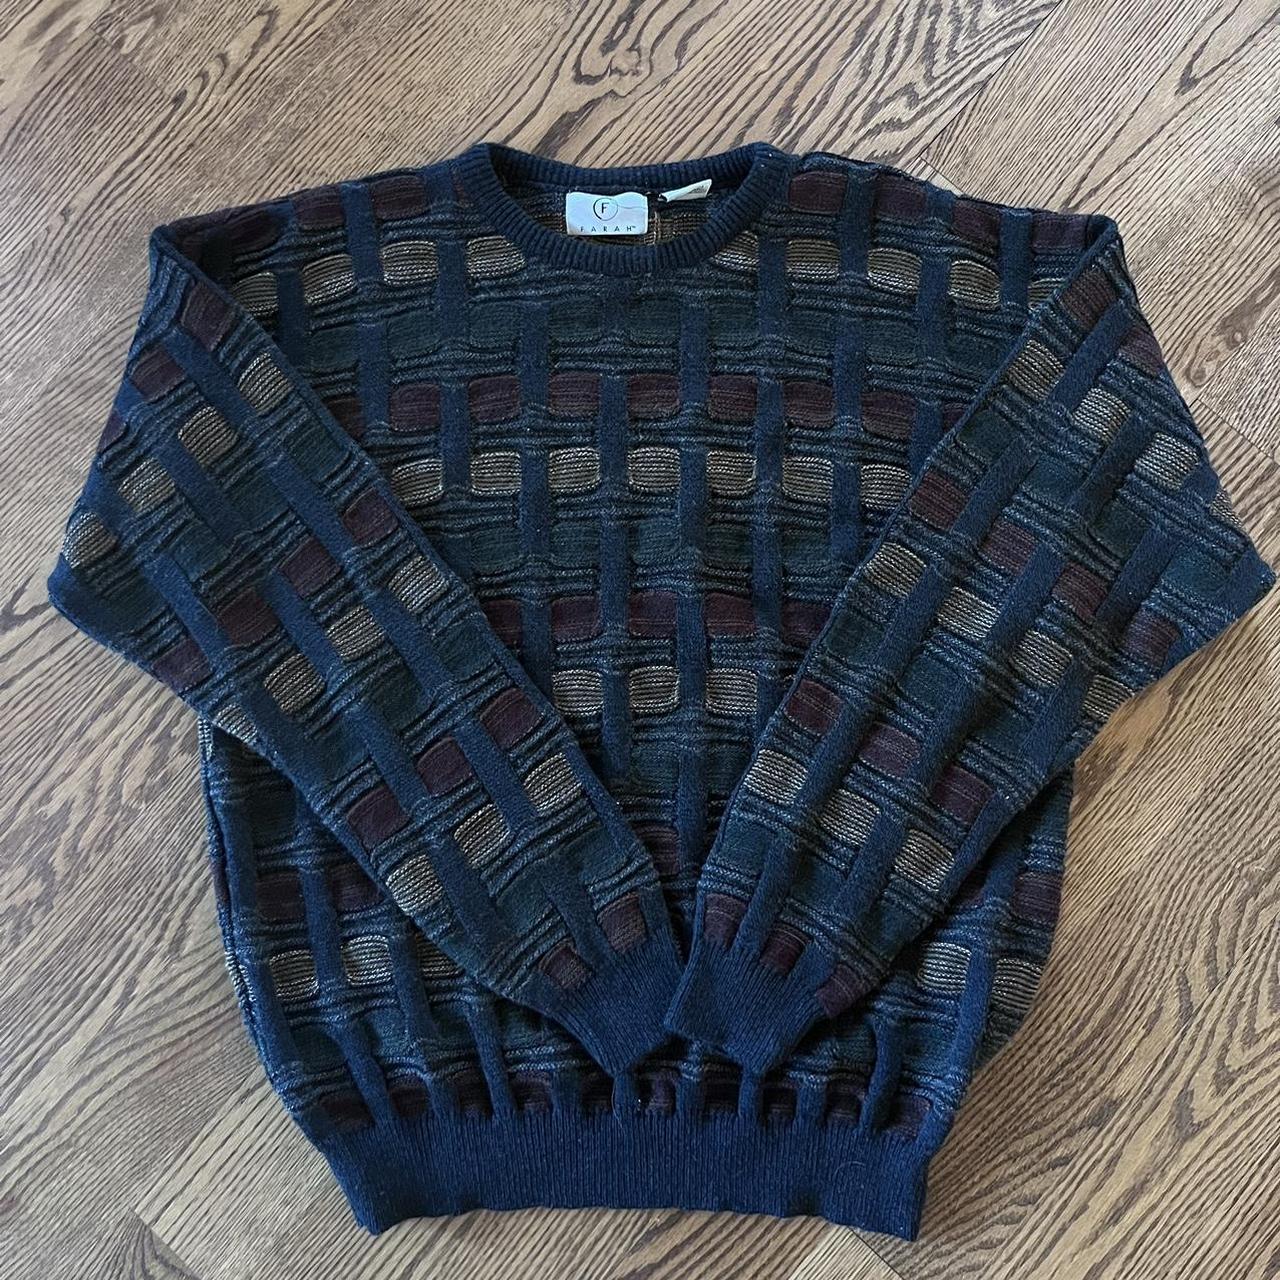 item listed by thanks_itsthrifted